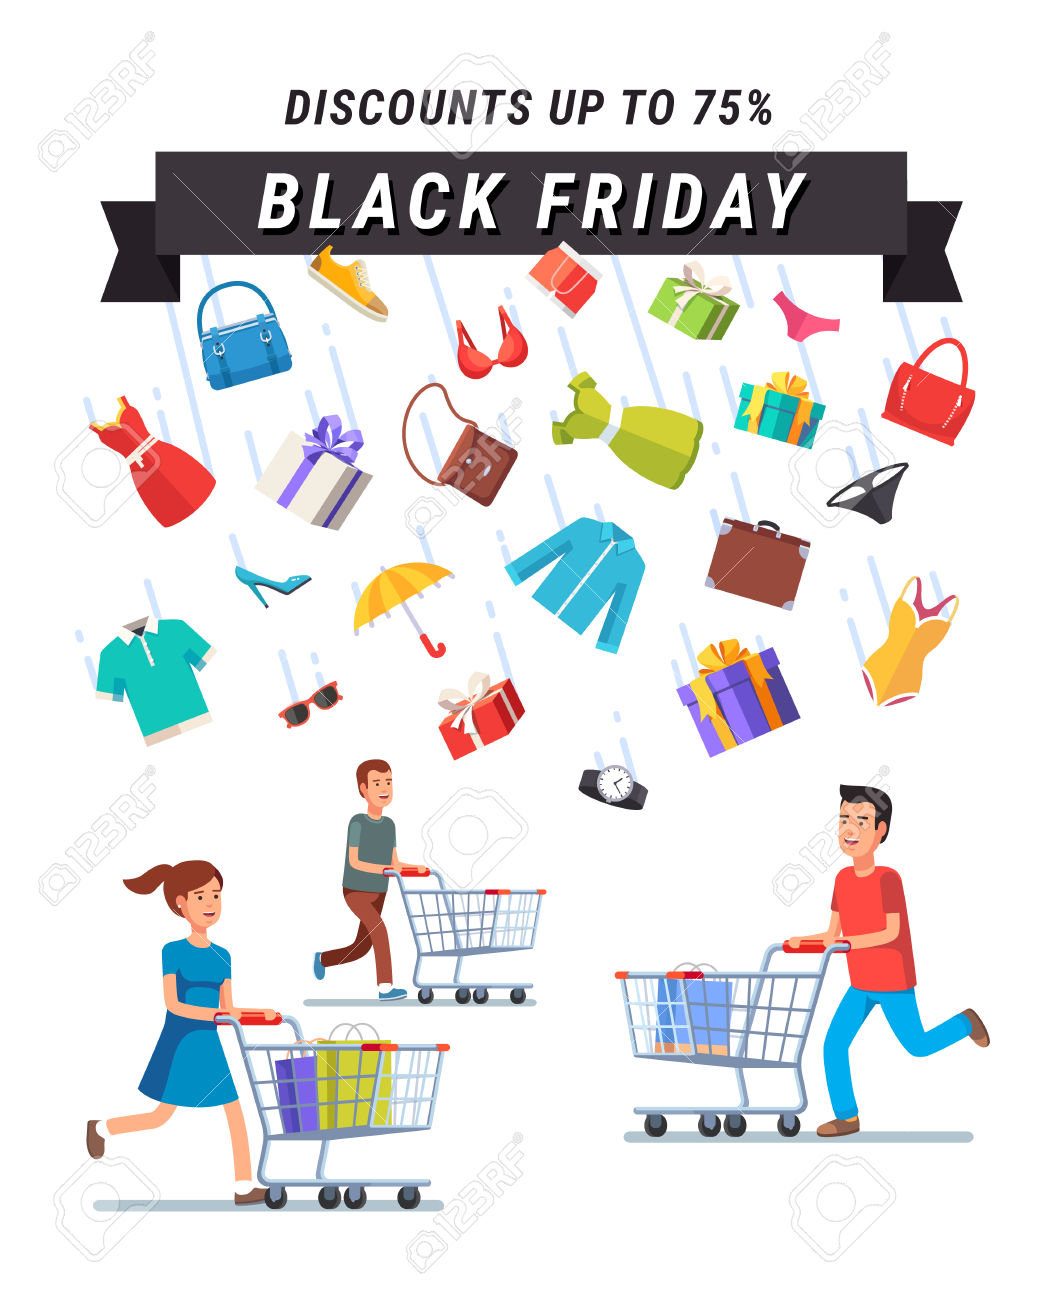 Black Friday Sale Advert Banner. People Running With Shopping.